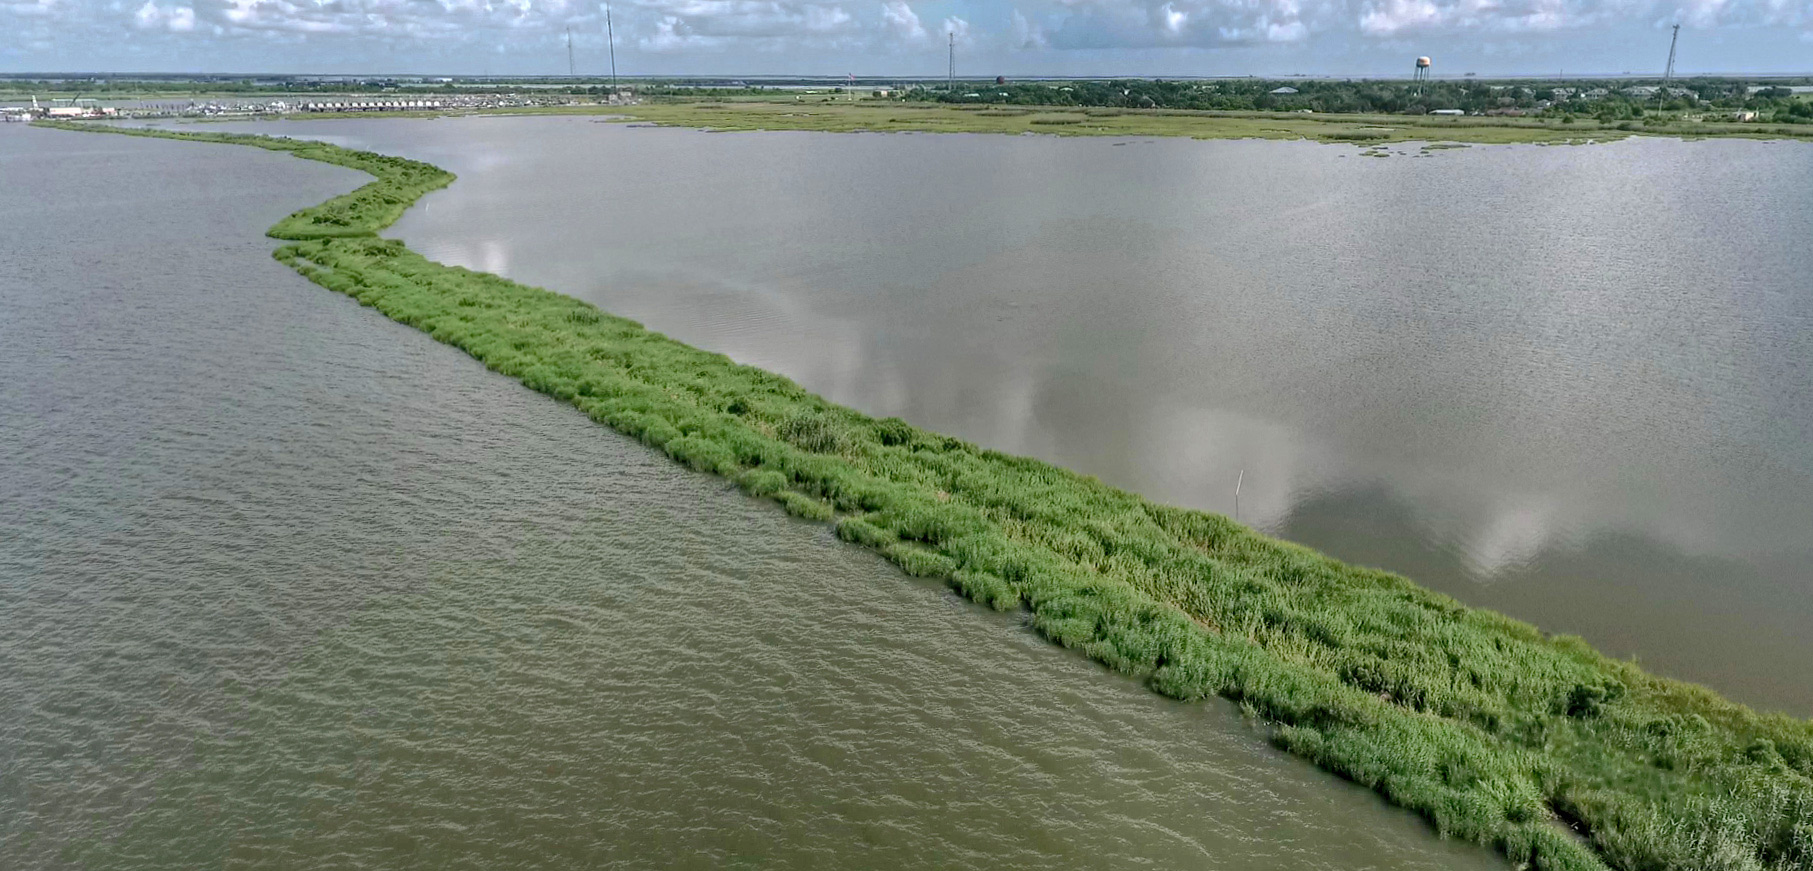 Along the coastline of Louisiana, artificial islands provide habitat for fish and wildlife and help lessen the impacts of wind and waves